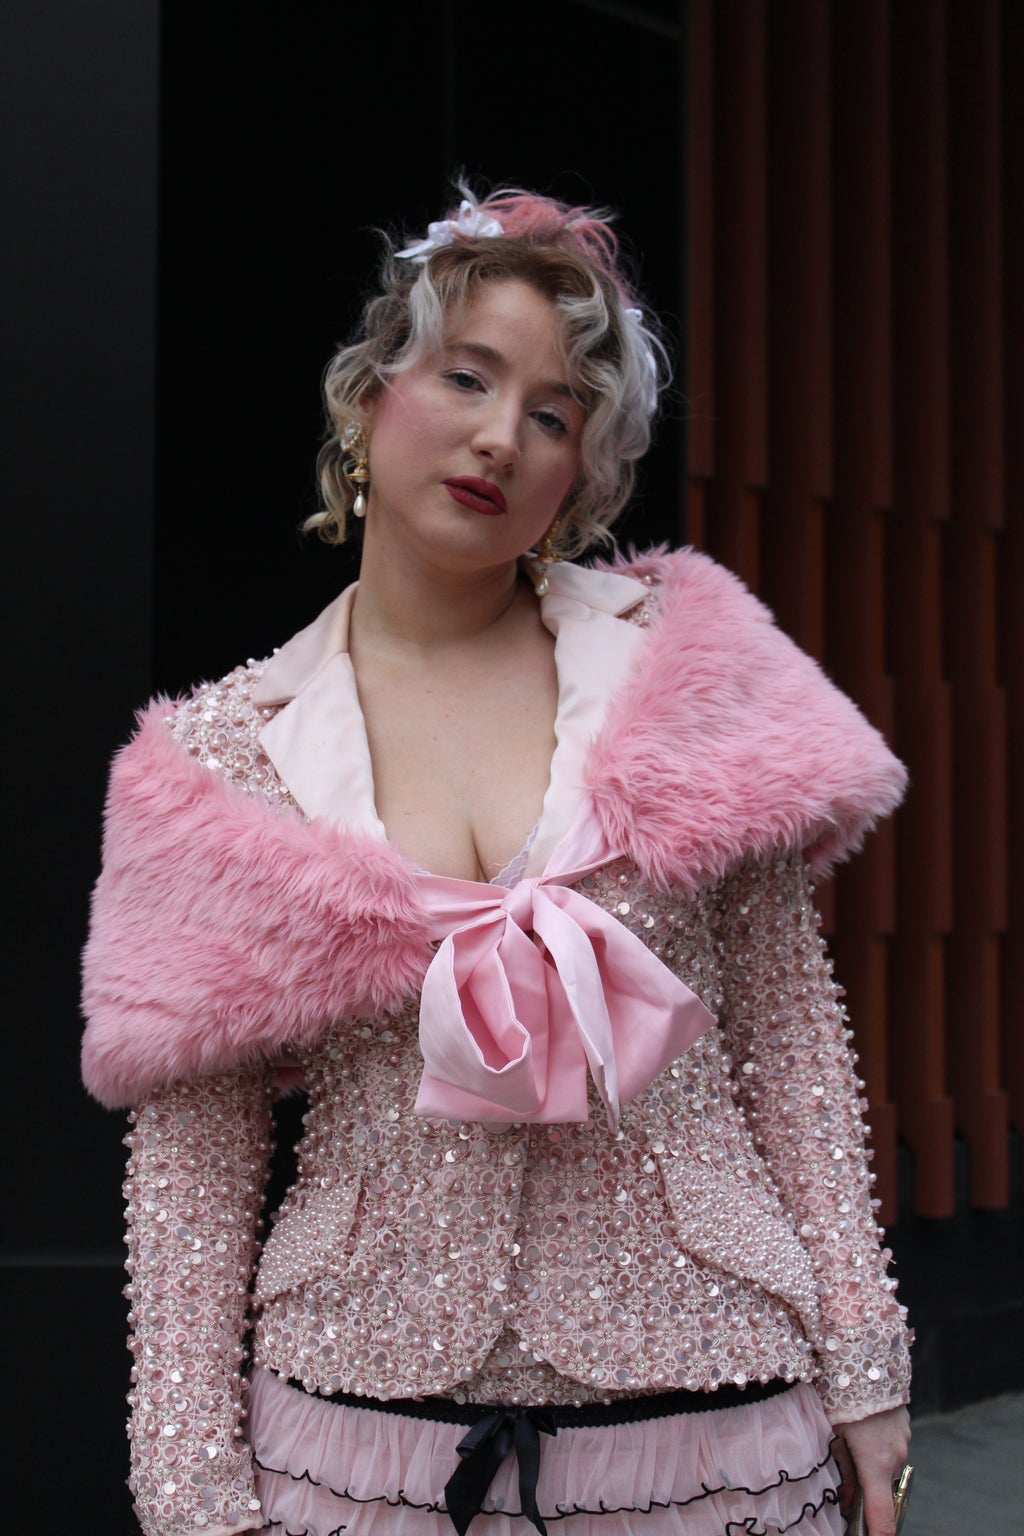 Woman in pink clothing shows off her NYFW outfit